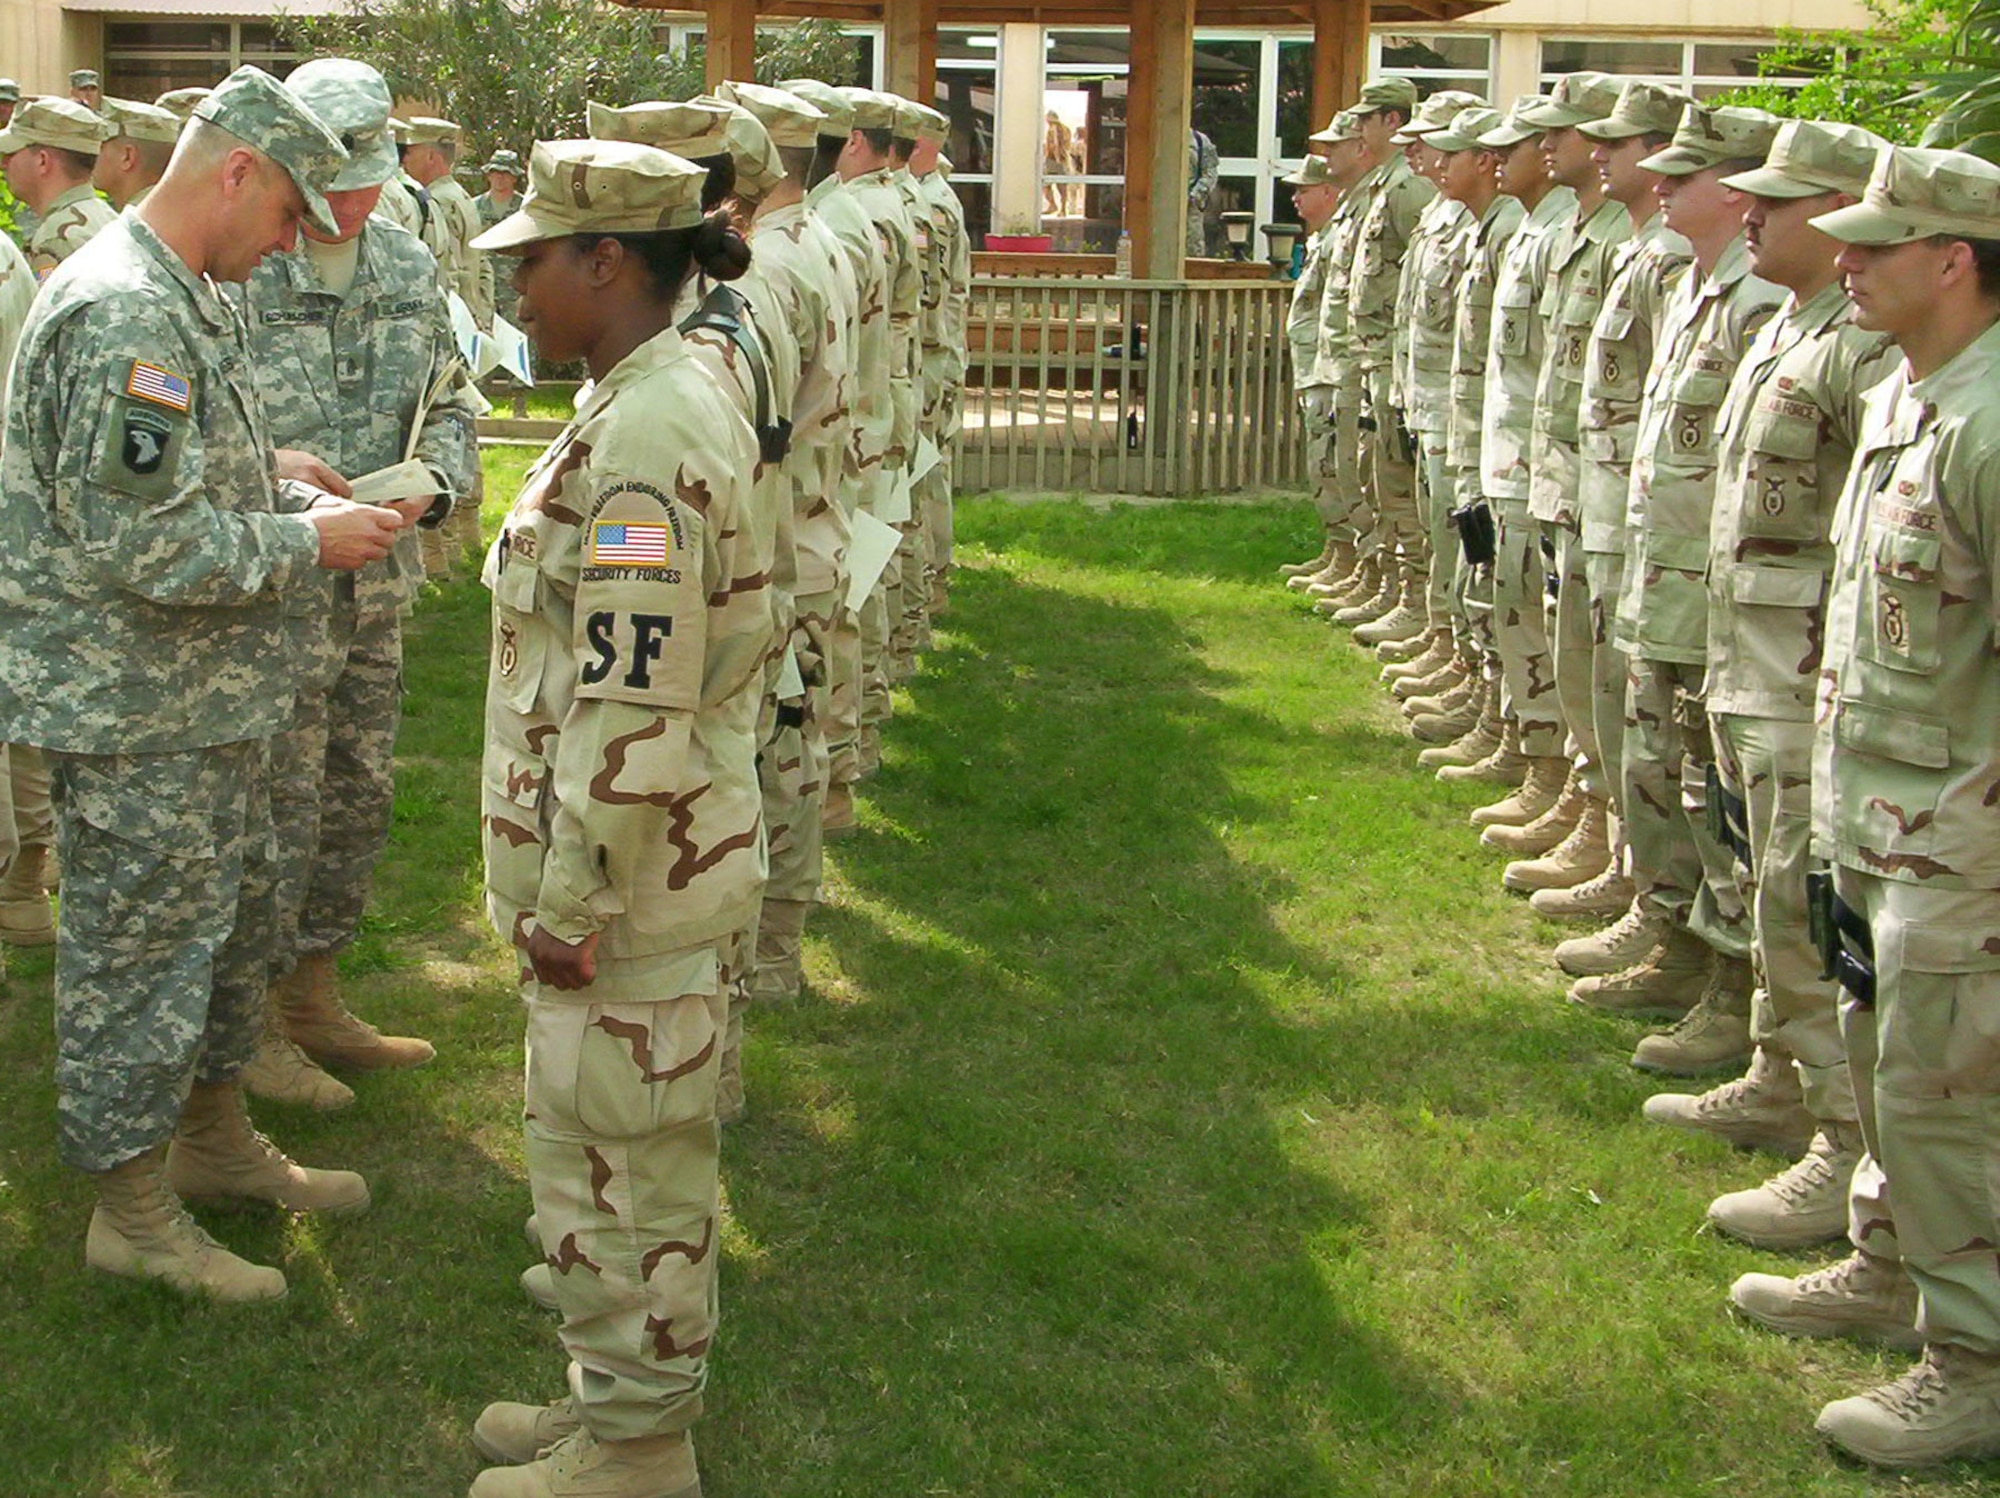 TIKRIT, Iraq -- Army Col. Charles Jones, 149th Armor Brigade garrison commander, and Garrison Command Sgt. Maj. Eric Schumaker present the 149th Armor Brigade’s combat patch to members of the 732nd Expeditionary Security Forces Squadron in Iraq during a ceremony earlier this month. The Army-unique ceremony recognized 43 Airmen from Mountain Home and three other Air Force bases who deployed to Tikrit in November to take on various Army military police duties. Air Force photo